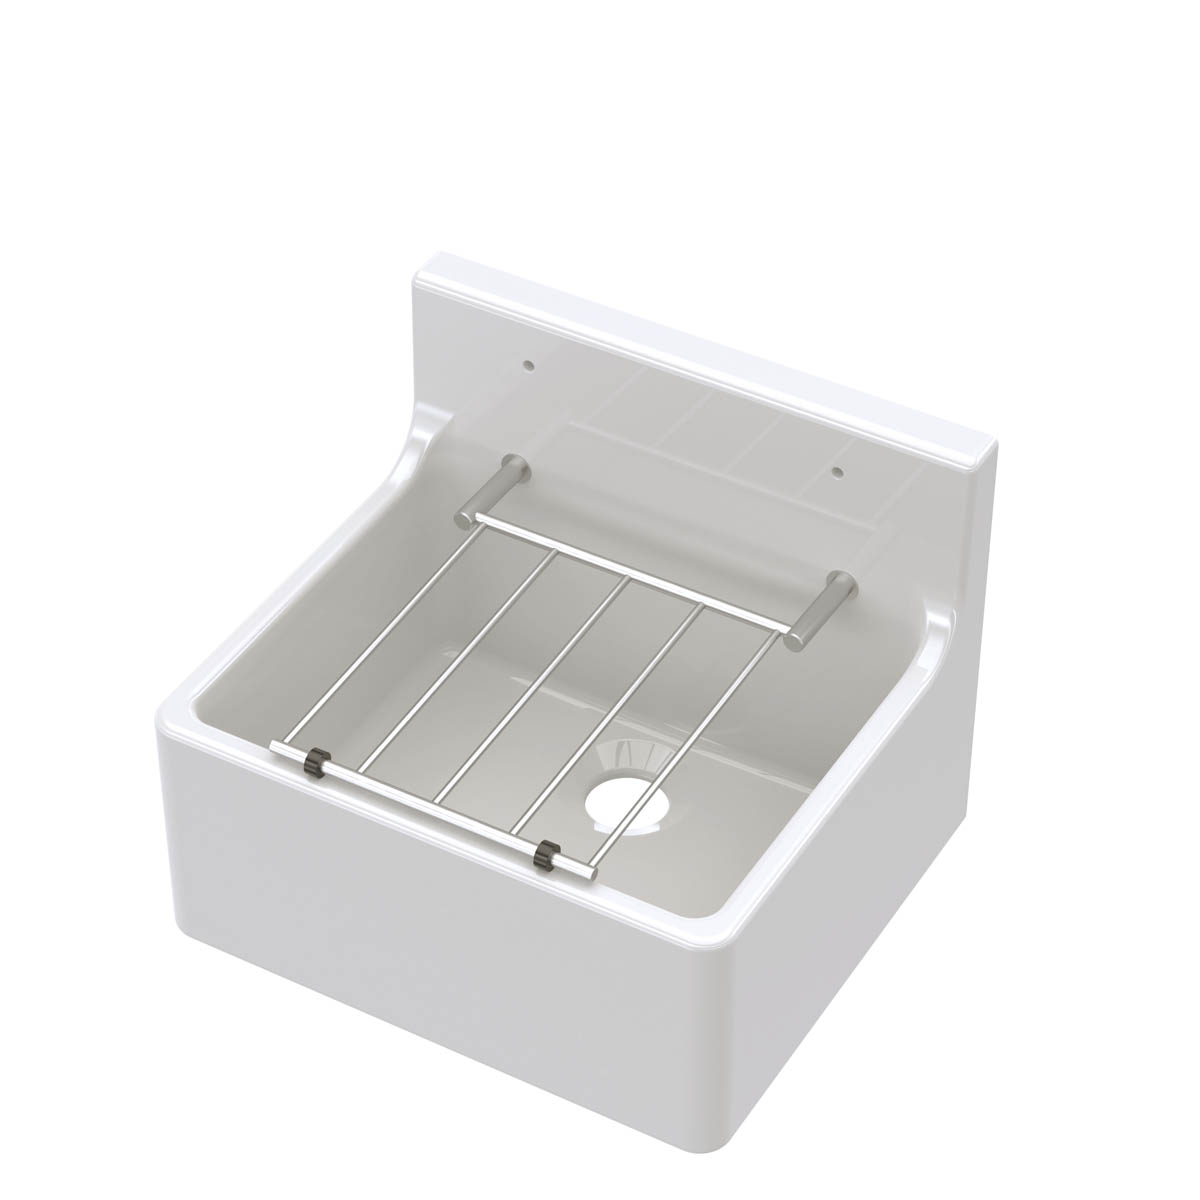 Nuie 455x362x396mm Cleaner Sink - White (20315)